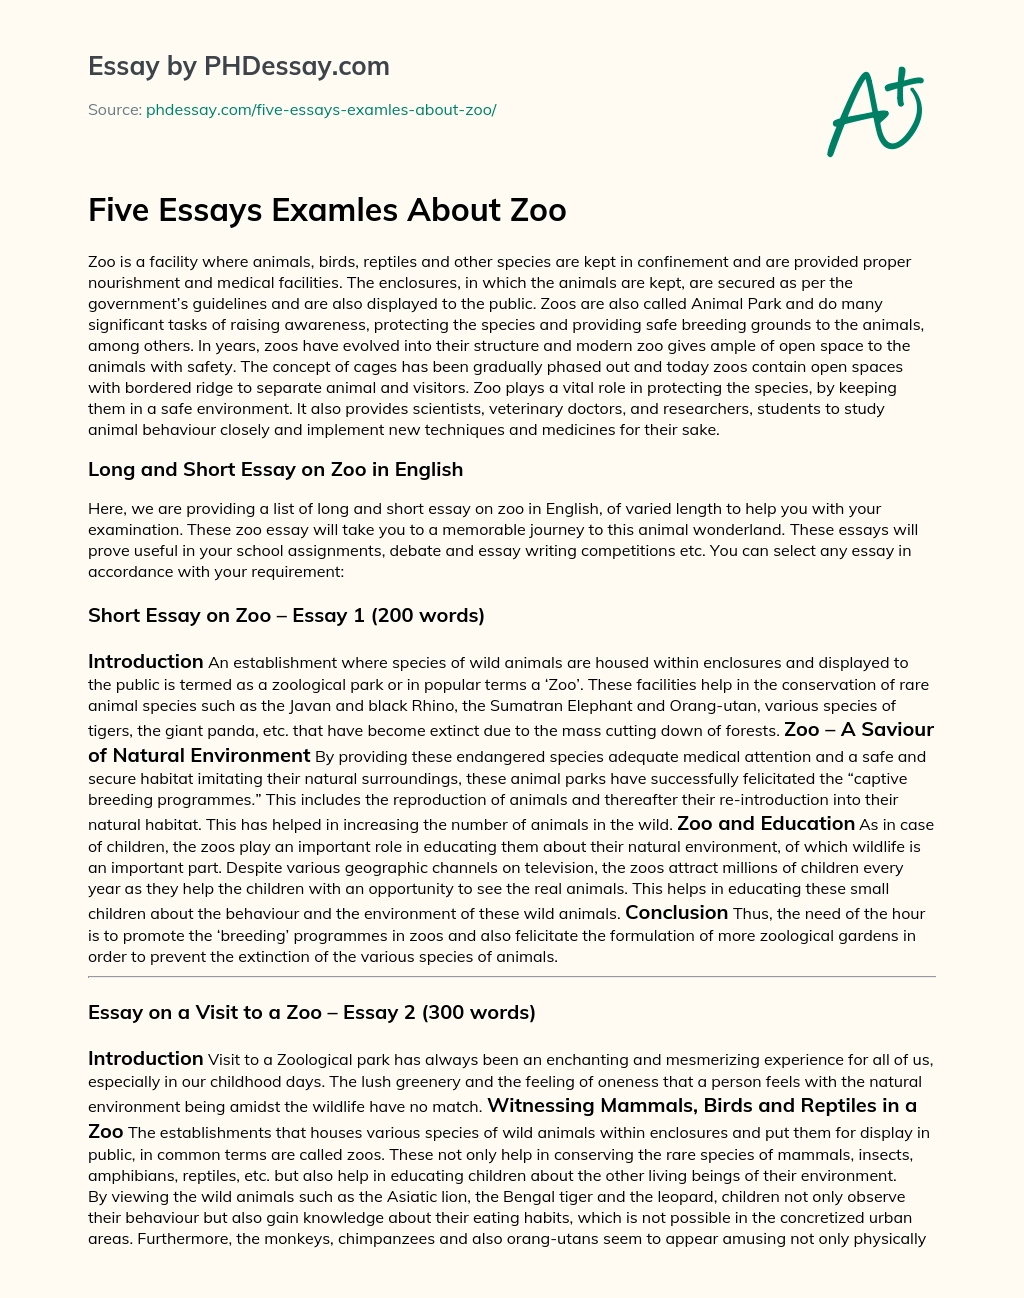 Five Essays Examles About Zoo Thesis Sample - 200, 300, 500 Words -  